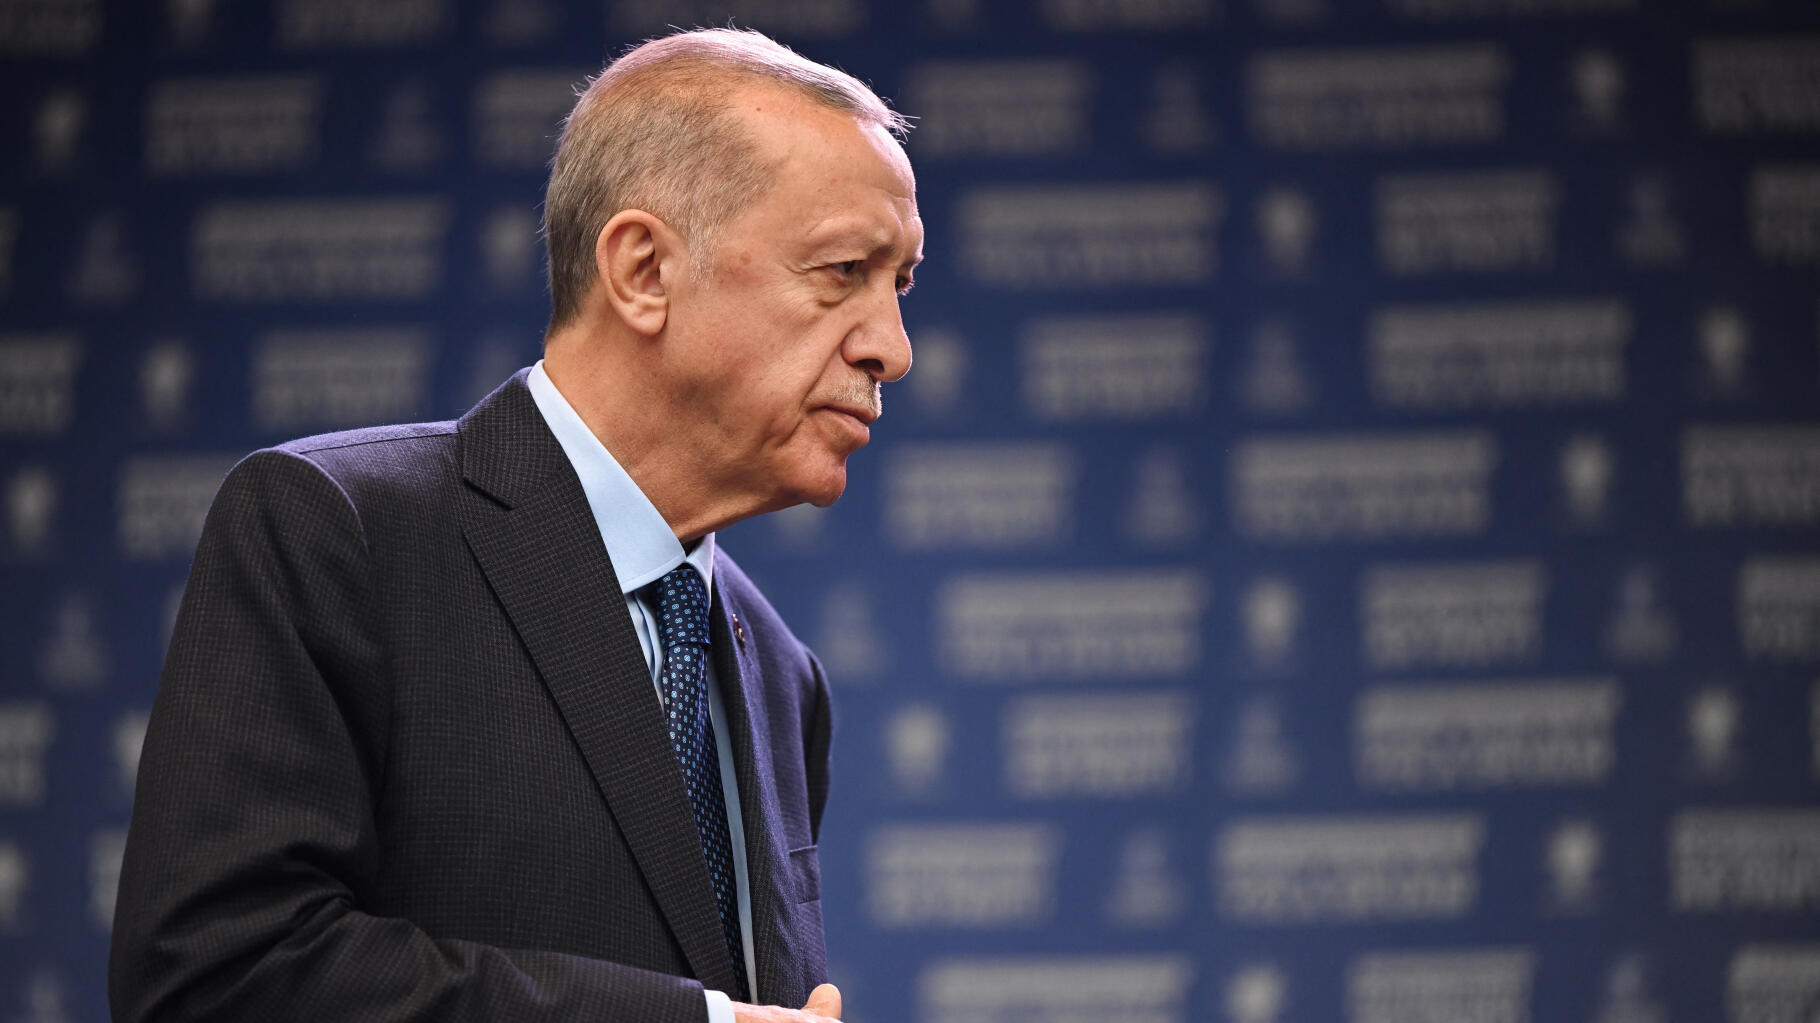 Erdoğan, having been dismissed the first time, says he is ready for a second round